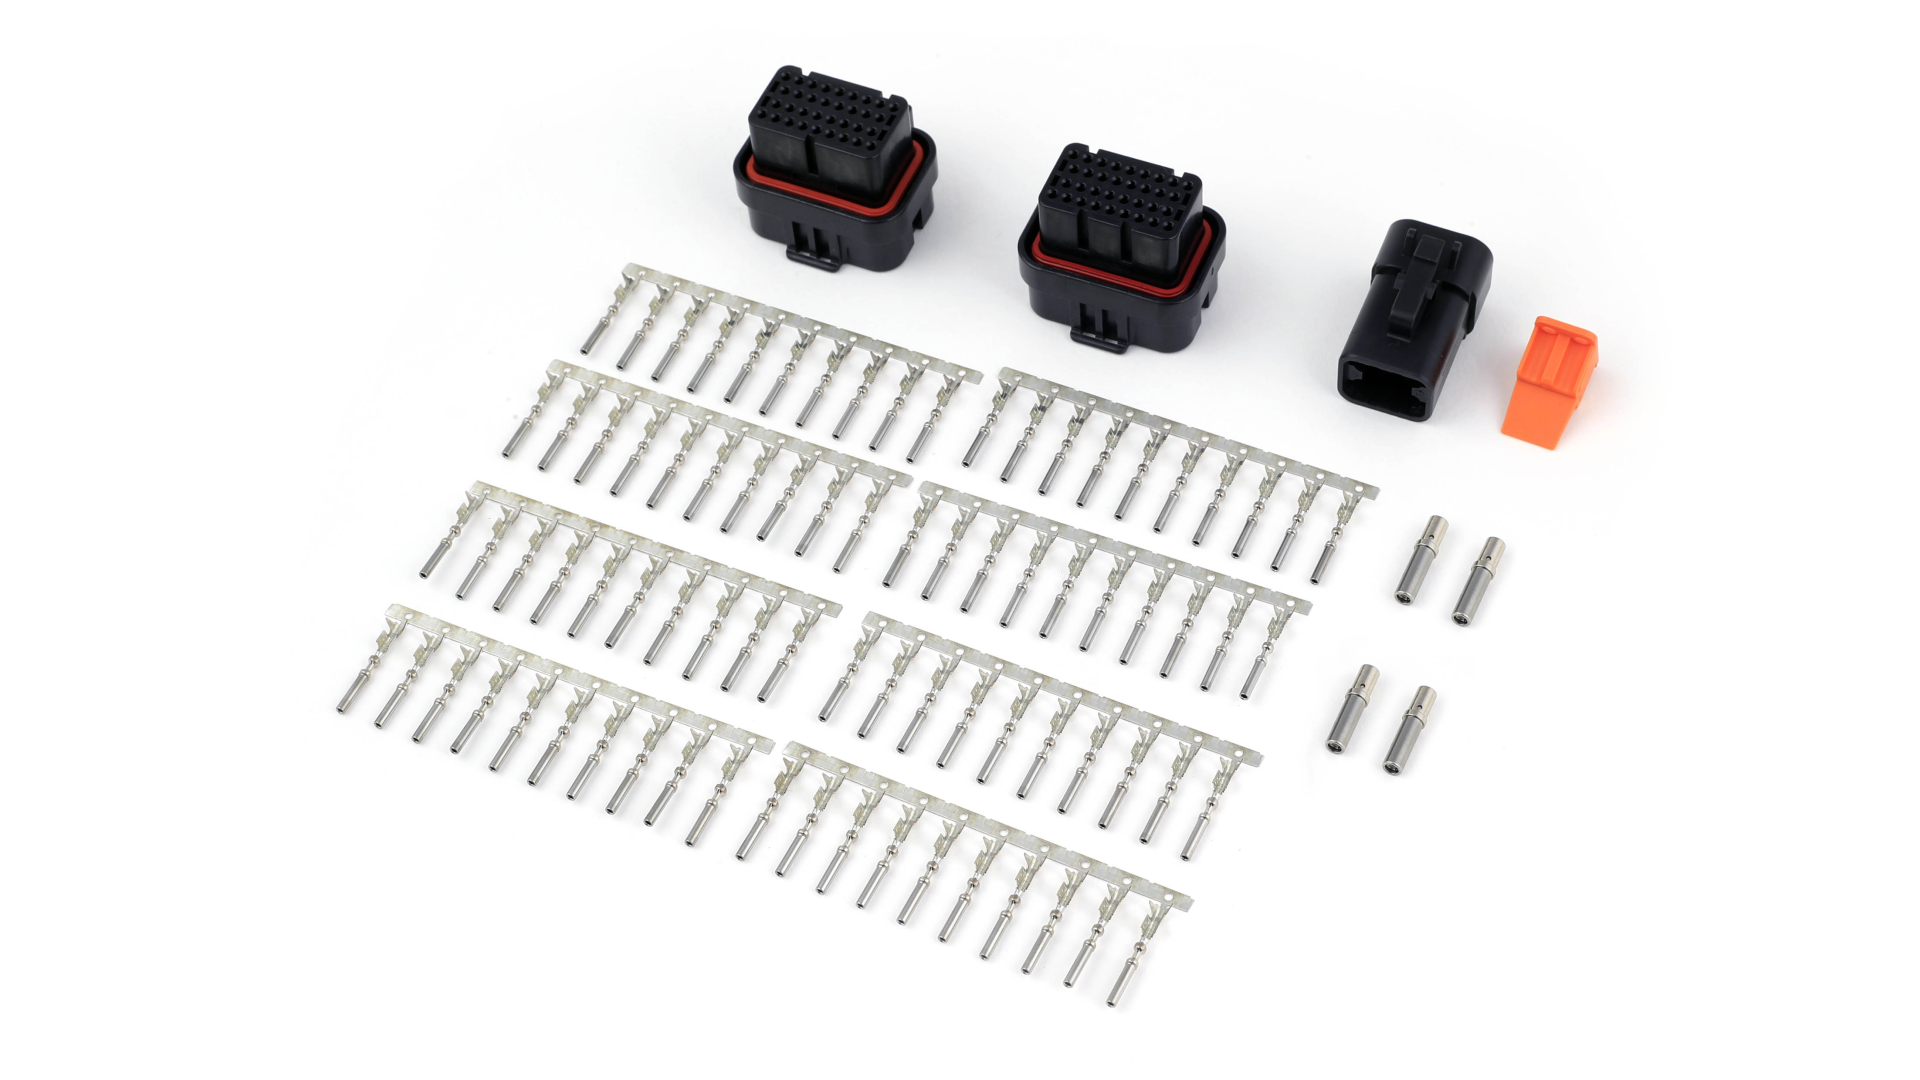 Haltech Set of plugs and pins for Nexus R3